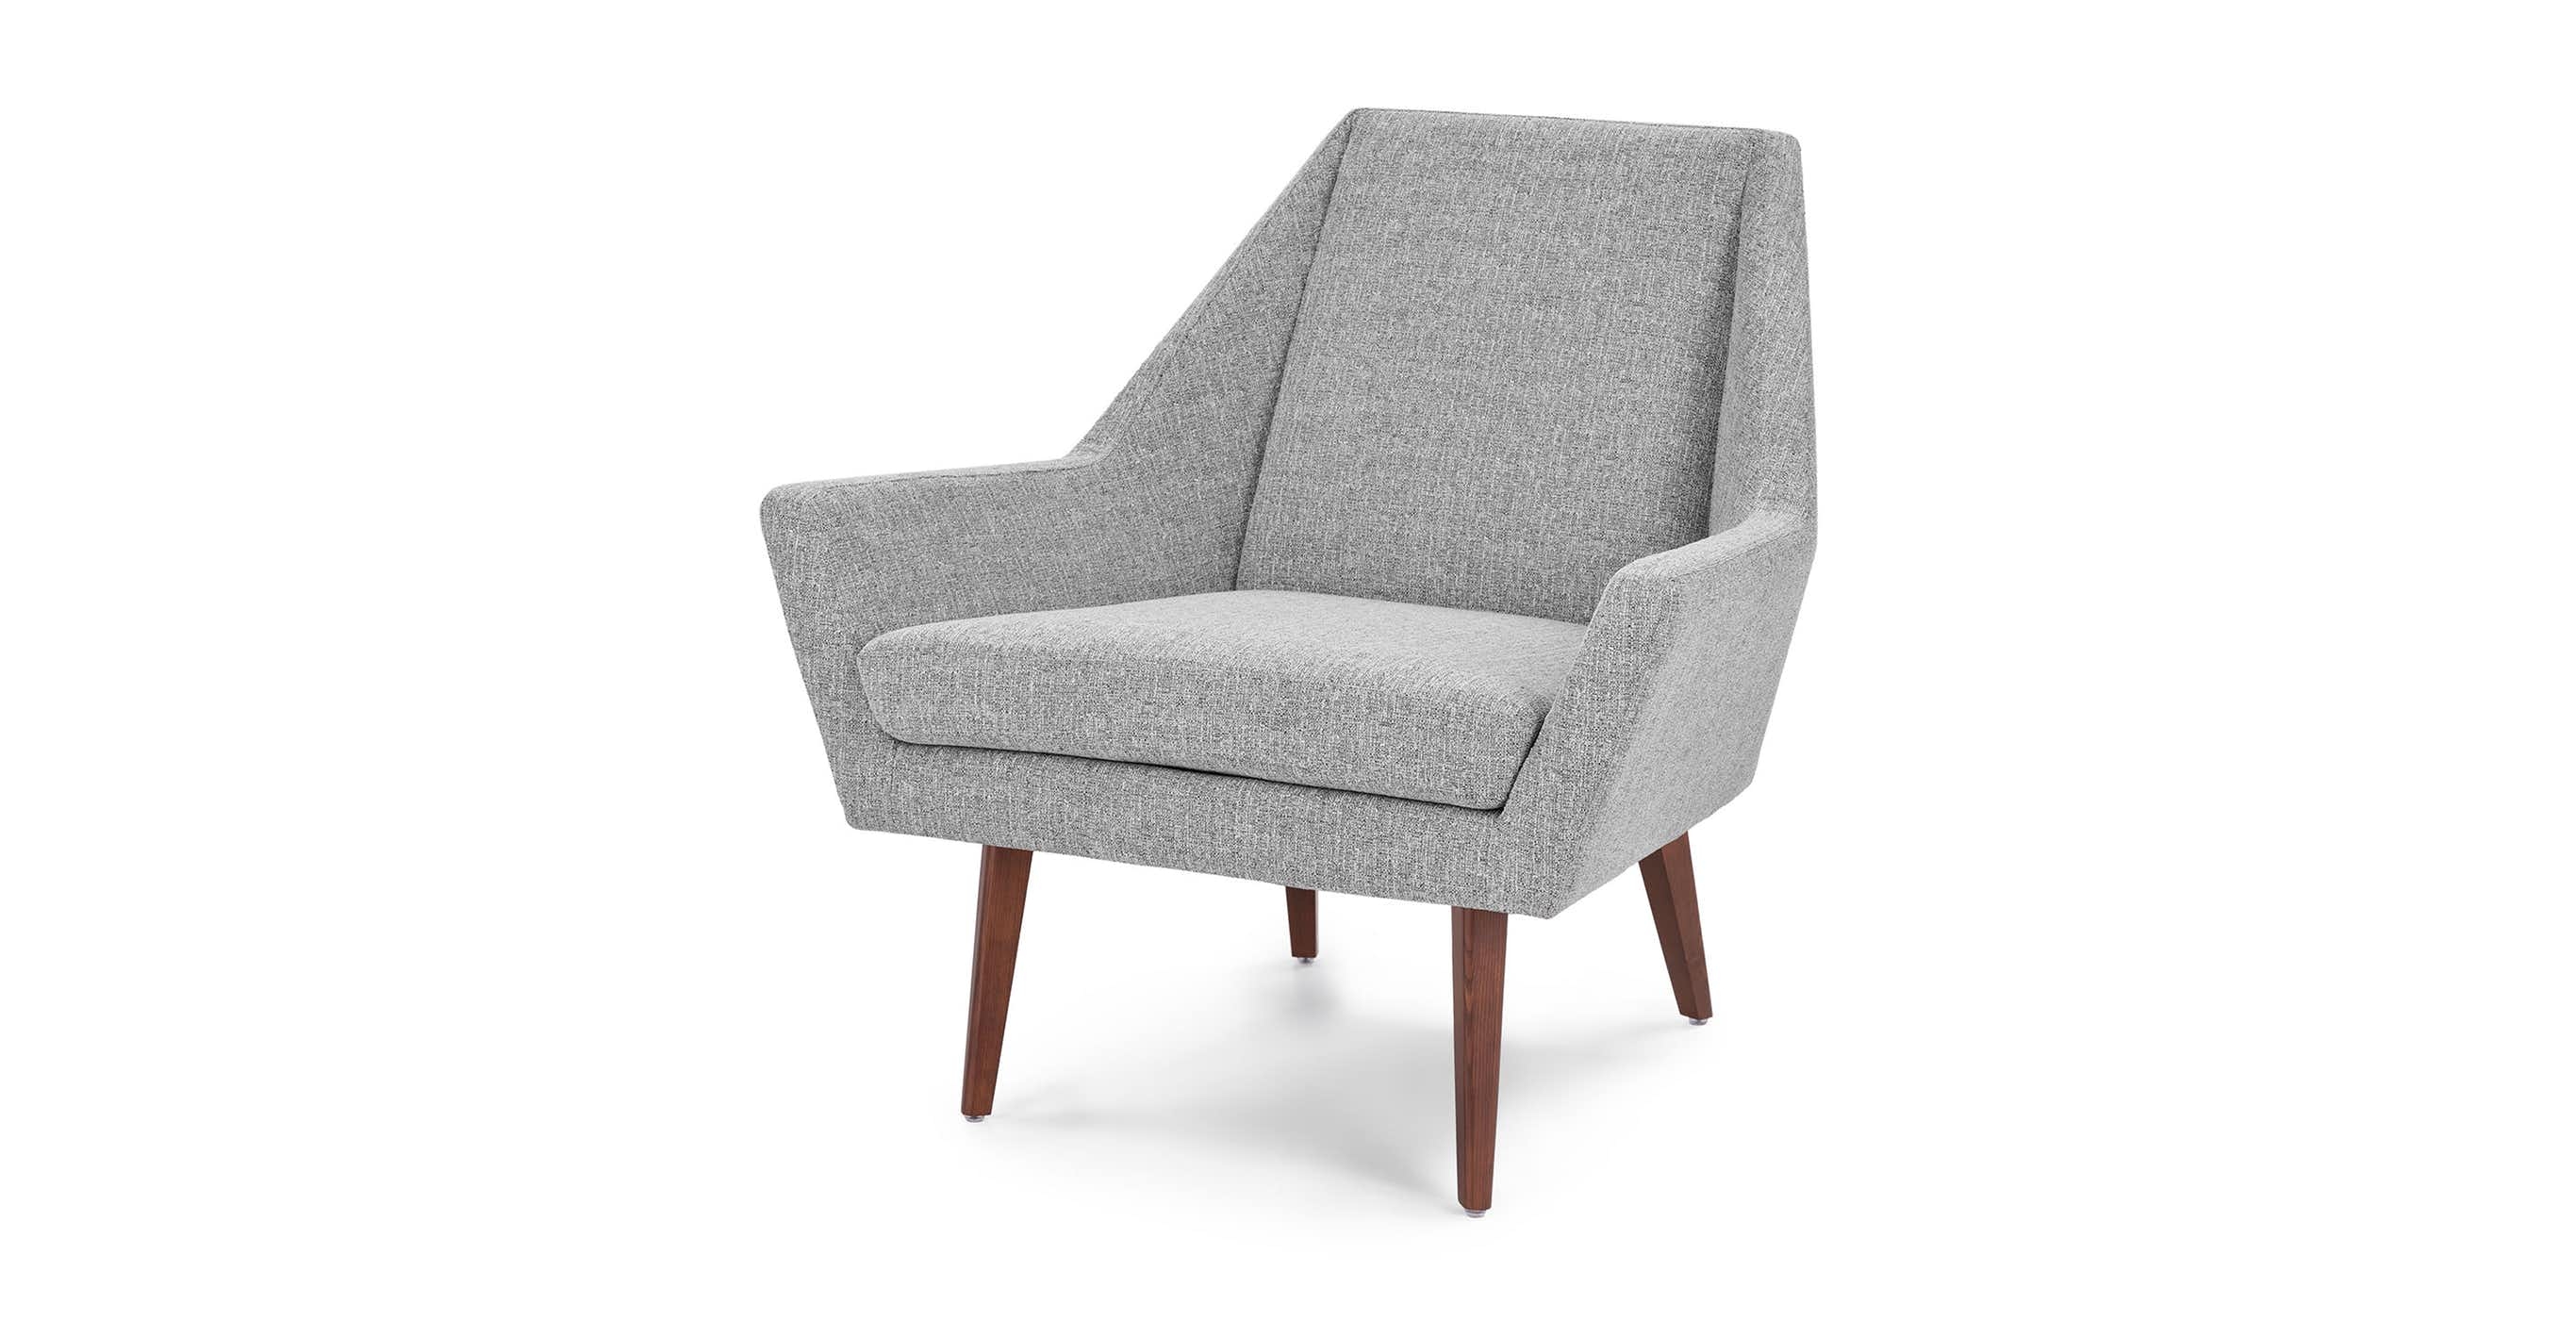 Angle Speckle Gray Chair - Image 1